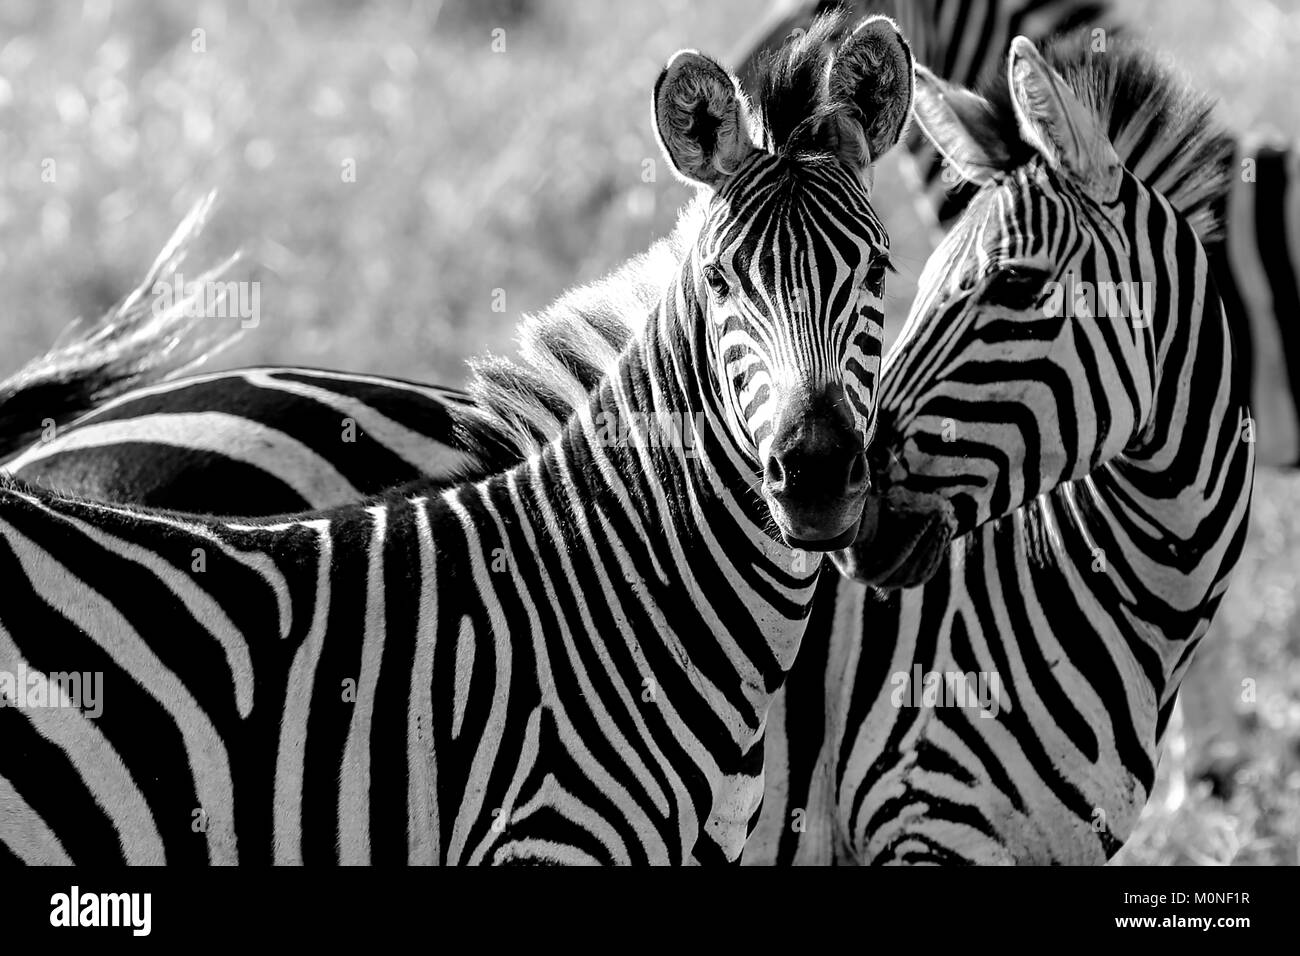 Two Zebra touching noses with other zebra behind against grassland background in black and white Stock Photo